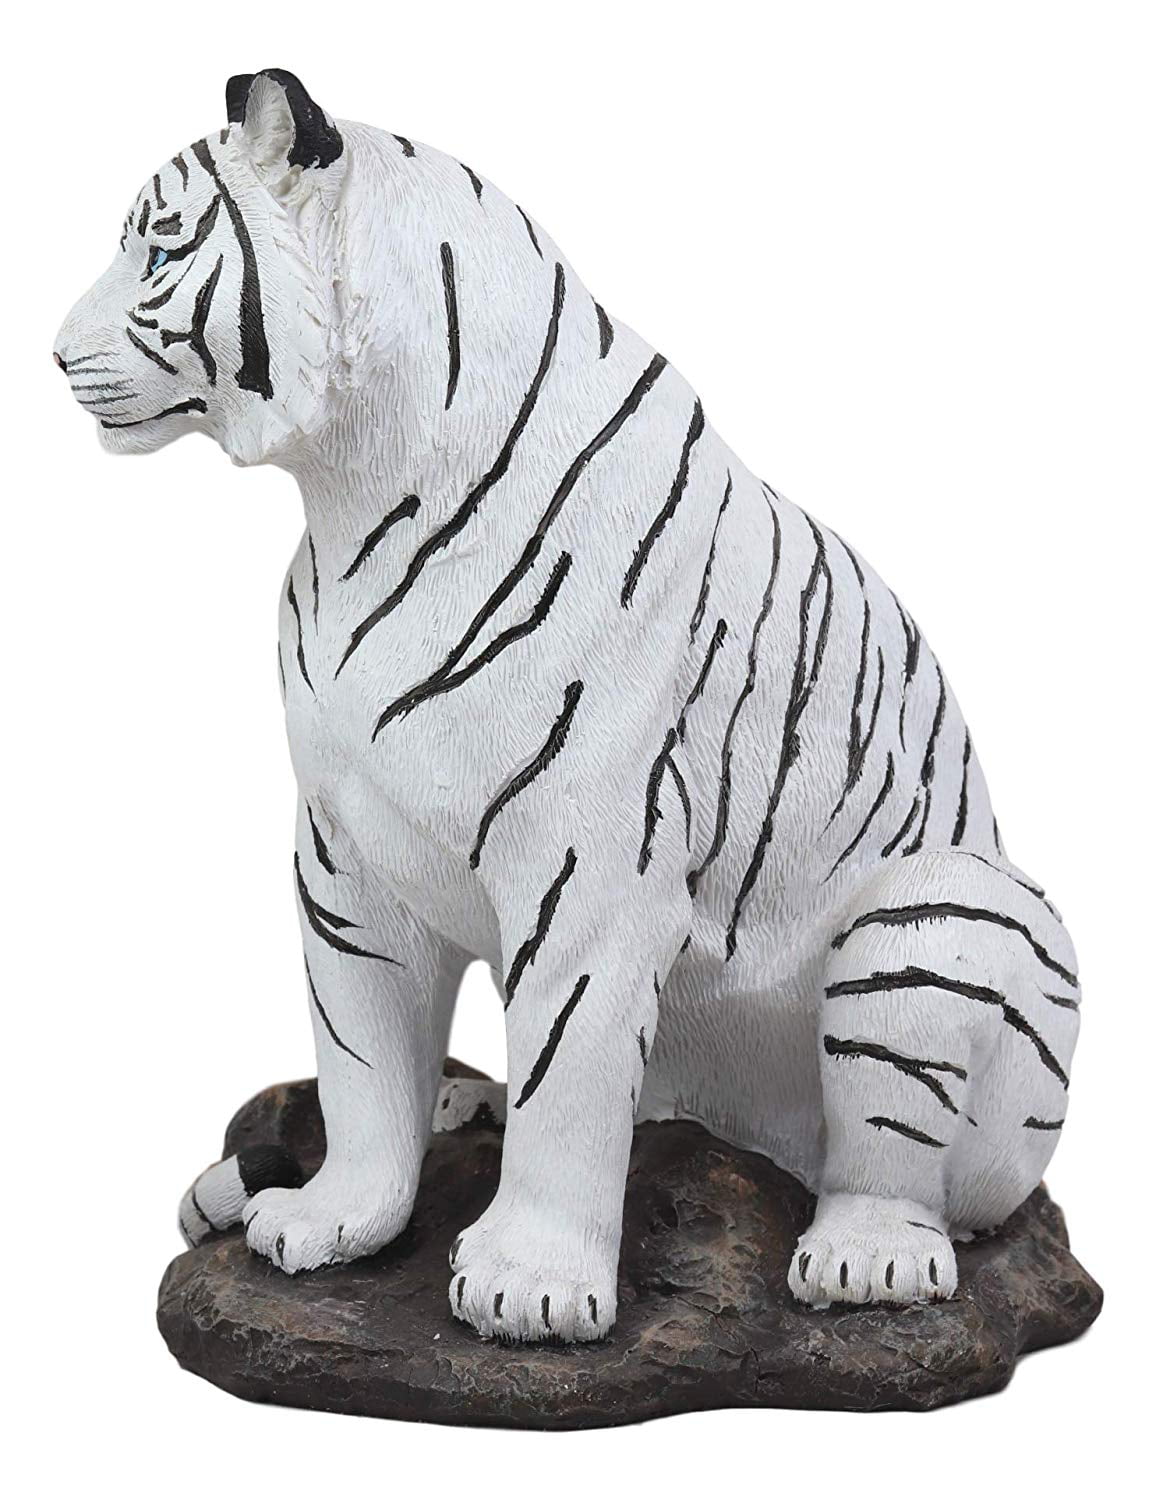 Ebros Gift Thirsty Siberian White Tiger Wine Oil Bottle Holder Figurine 11 Long Home Kitchen and Dining Party Hosting Jungle Animal Tigers Tigress and Giant Cats Decor Accessory 